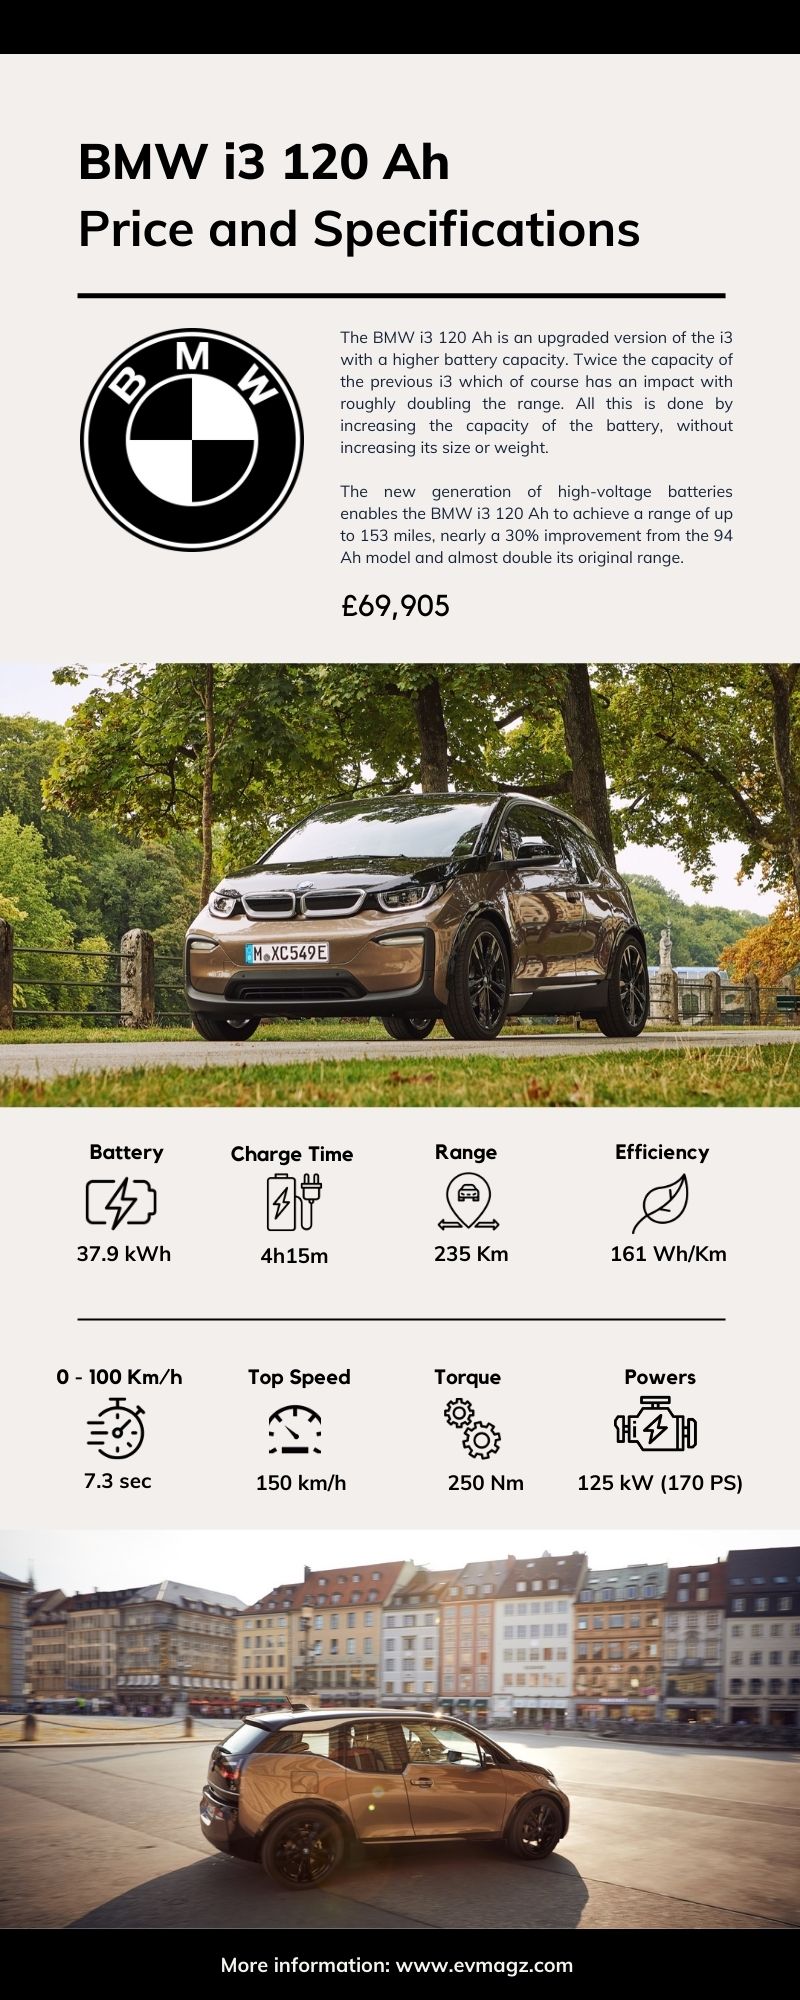 BMW i3 120 Ah Price and Specifications Infographic - BMW i3 120 Ah Price and Specifications [Infographic]